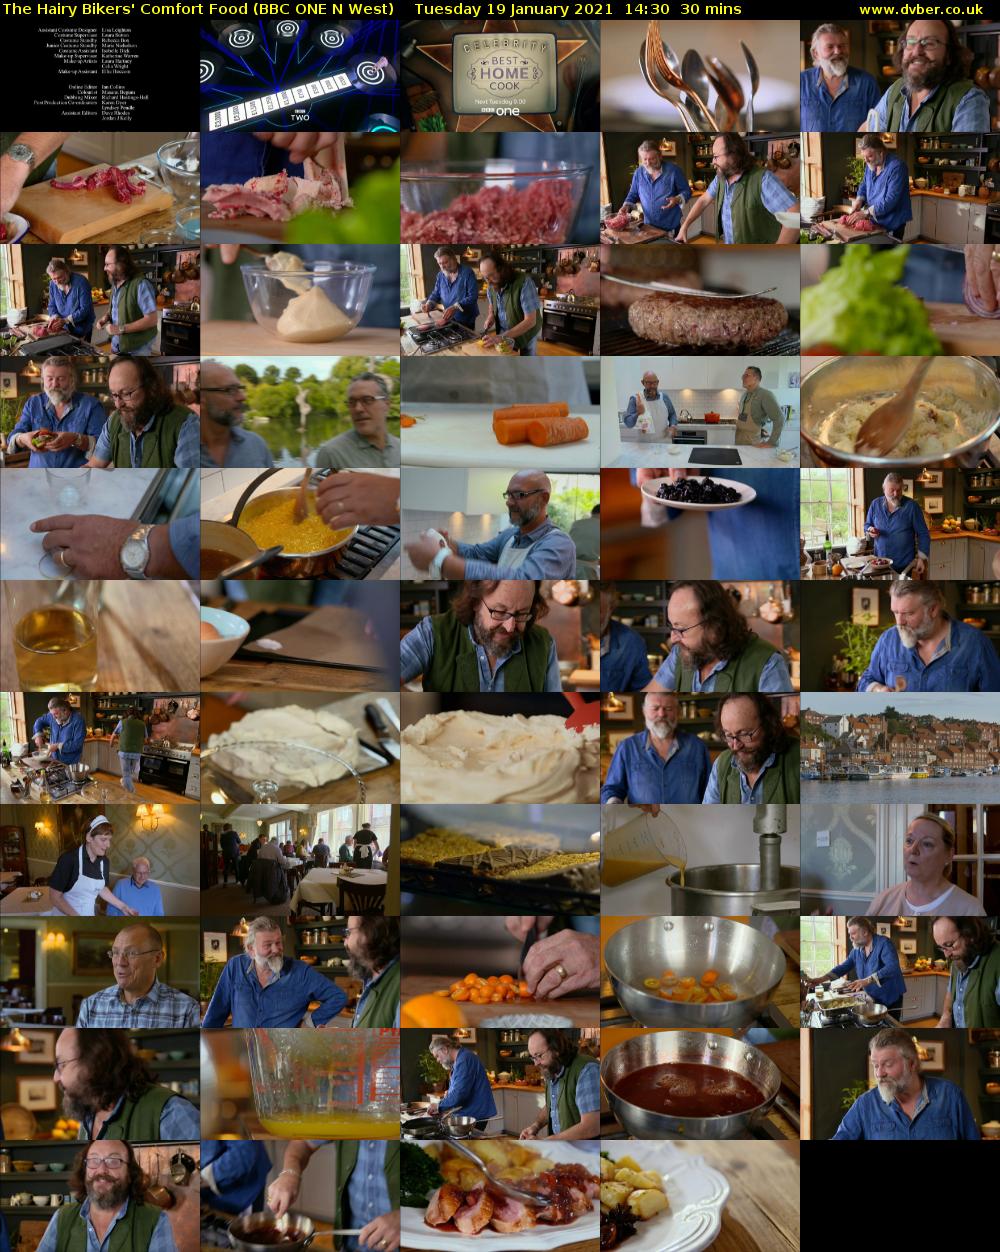 The Hairy Bikers' Comfort Food (BBC ONE N West) Tuesday 19 January 2021 14:30 - 15:00